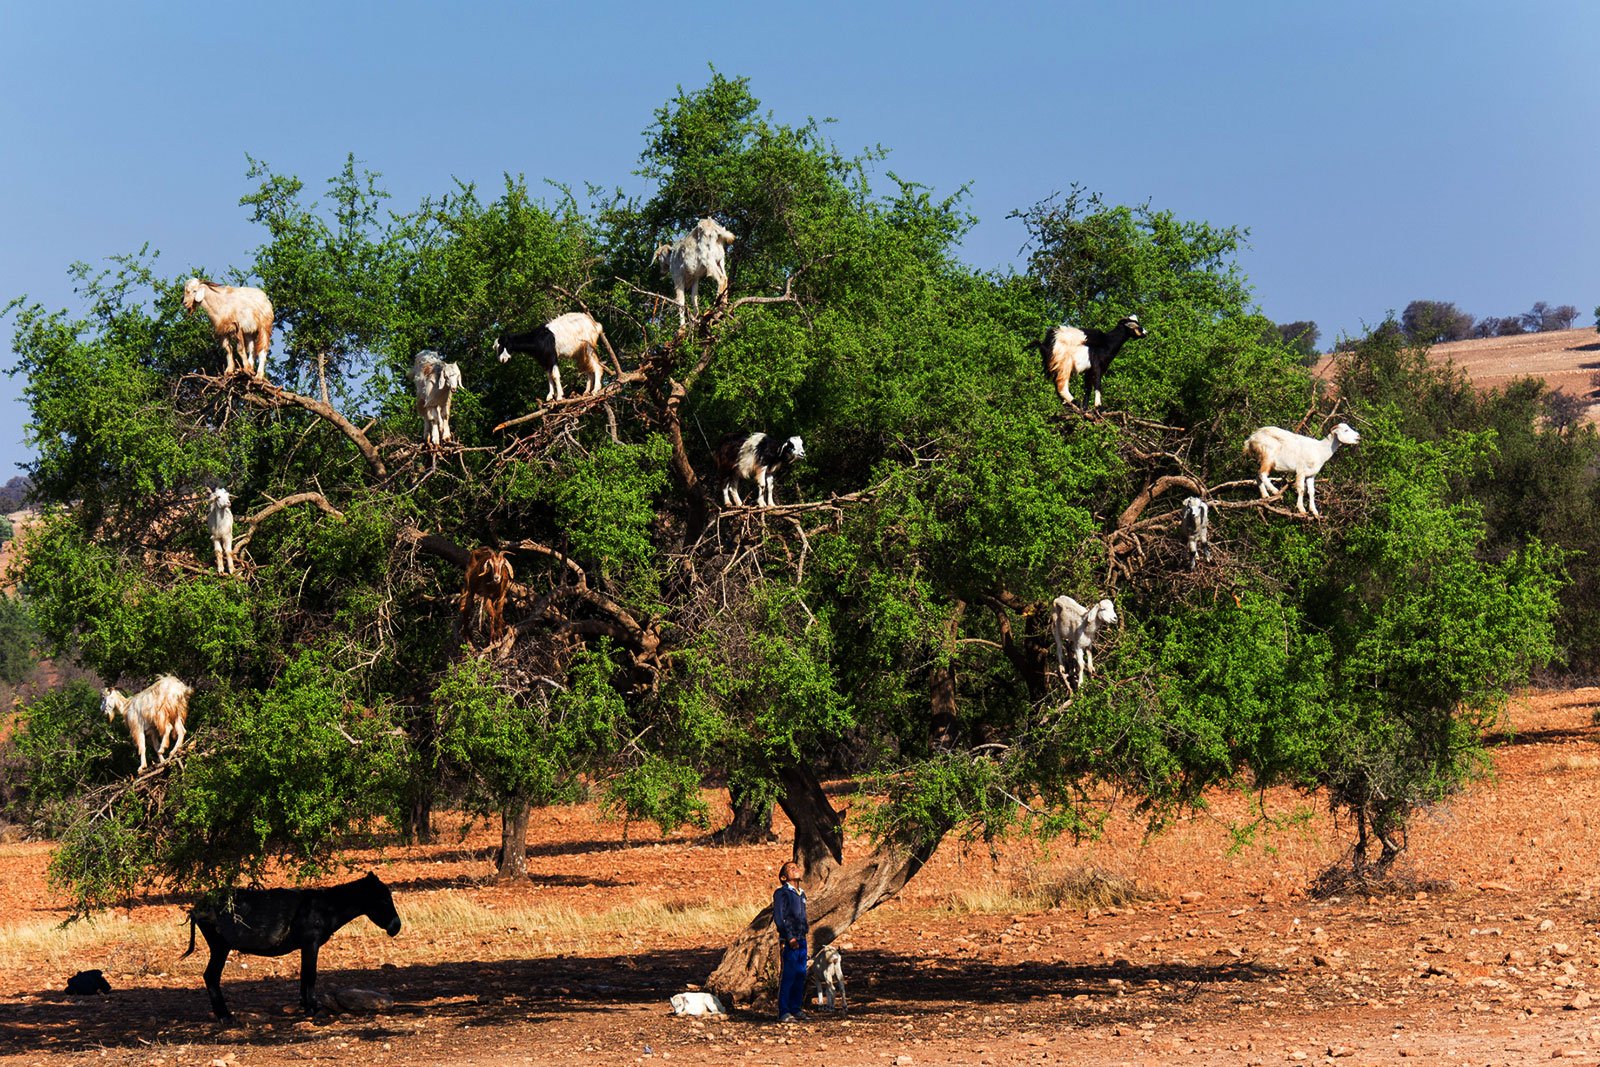 How to see goats grazing on trees in Marrakesh